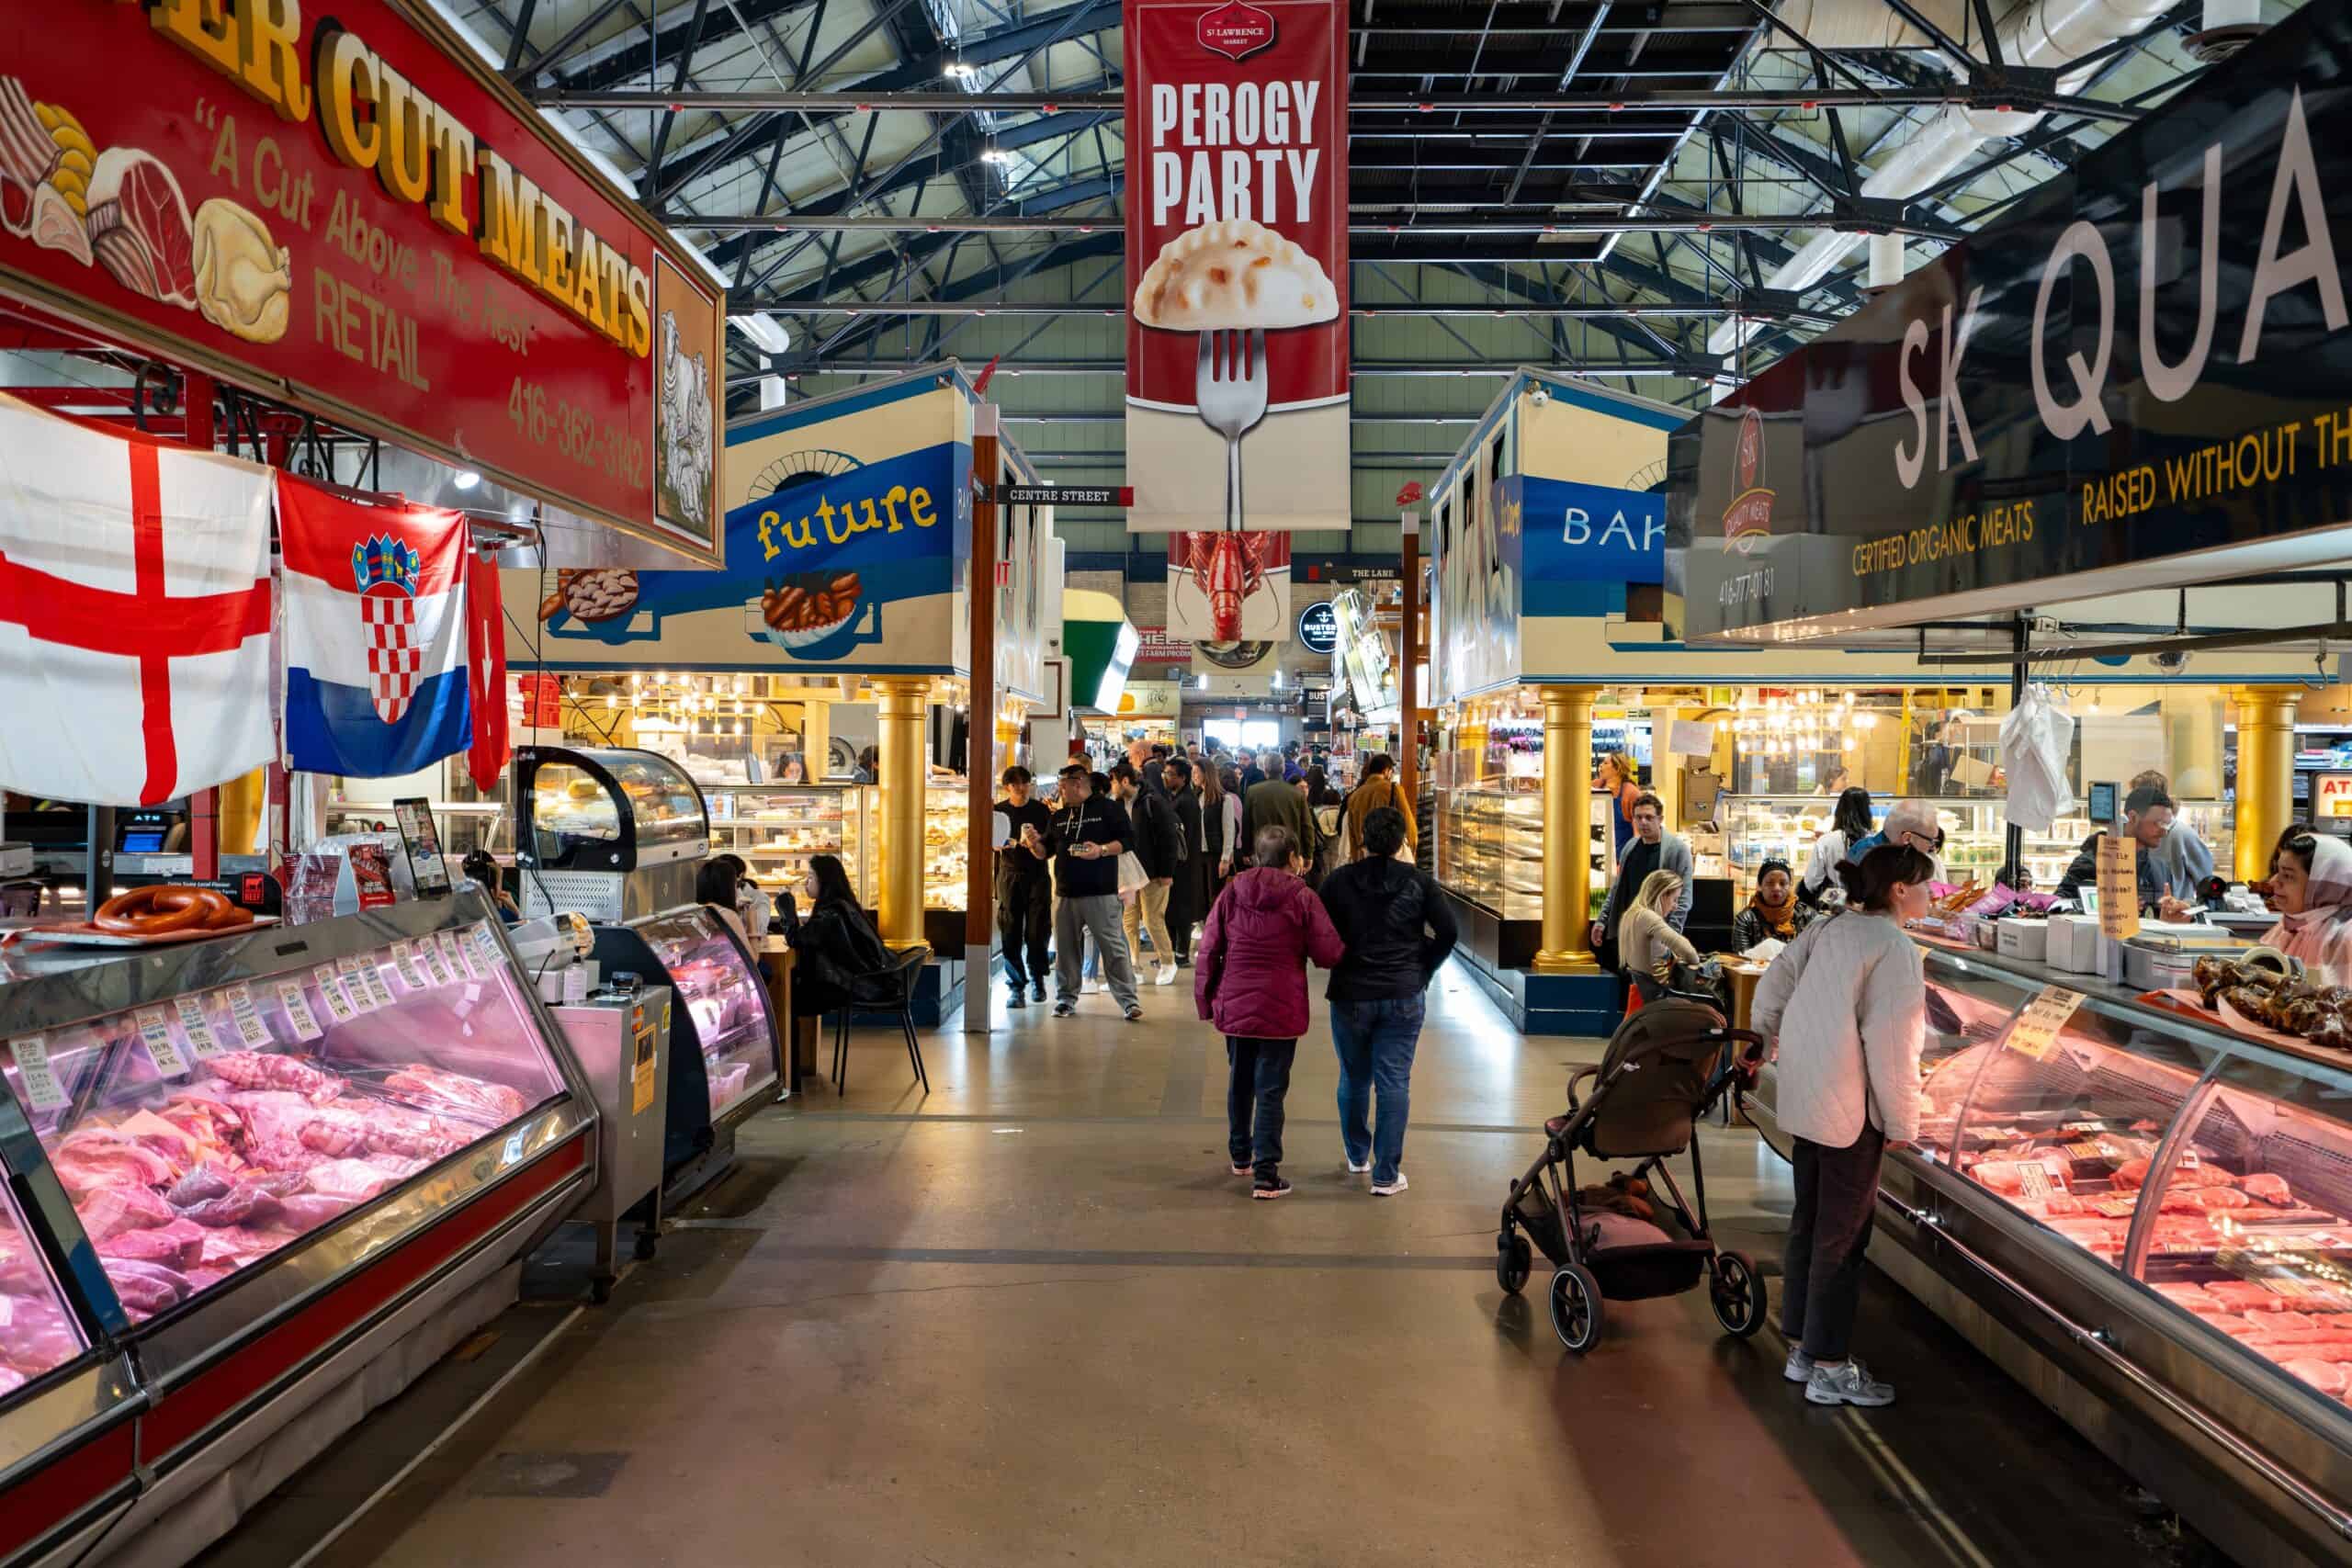 <p>St. Lawrence Market is a historic market in Toronto, known for its wide range of local and international foods. The market features over 120 vendors selling everything from fresh produce to artisanal goods, making it a must-visit for food enthusiasts. Donât miss the peameal bacon sandwich. The best times to visit are morning or early afternoon. Located in downtown Toronto, it’s accessible by public transit or car.</p>